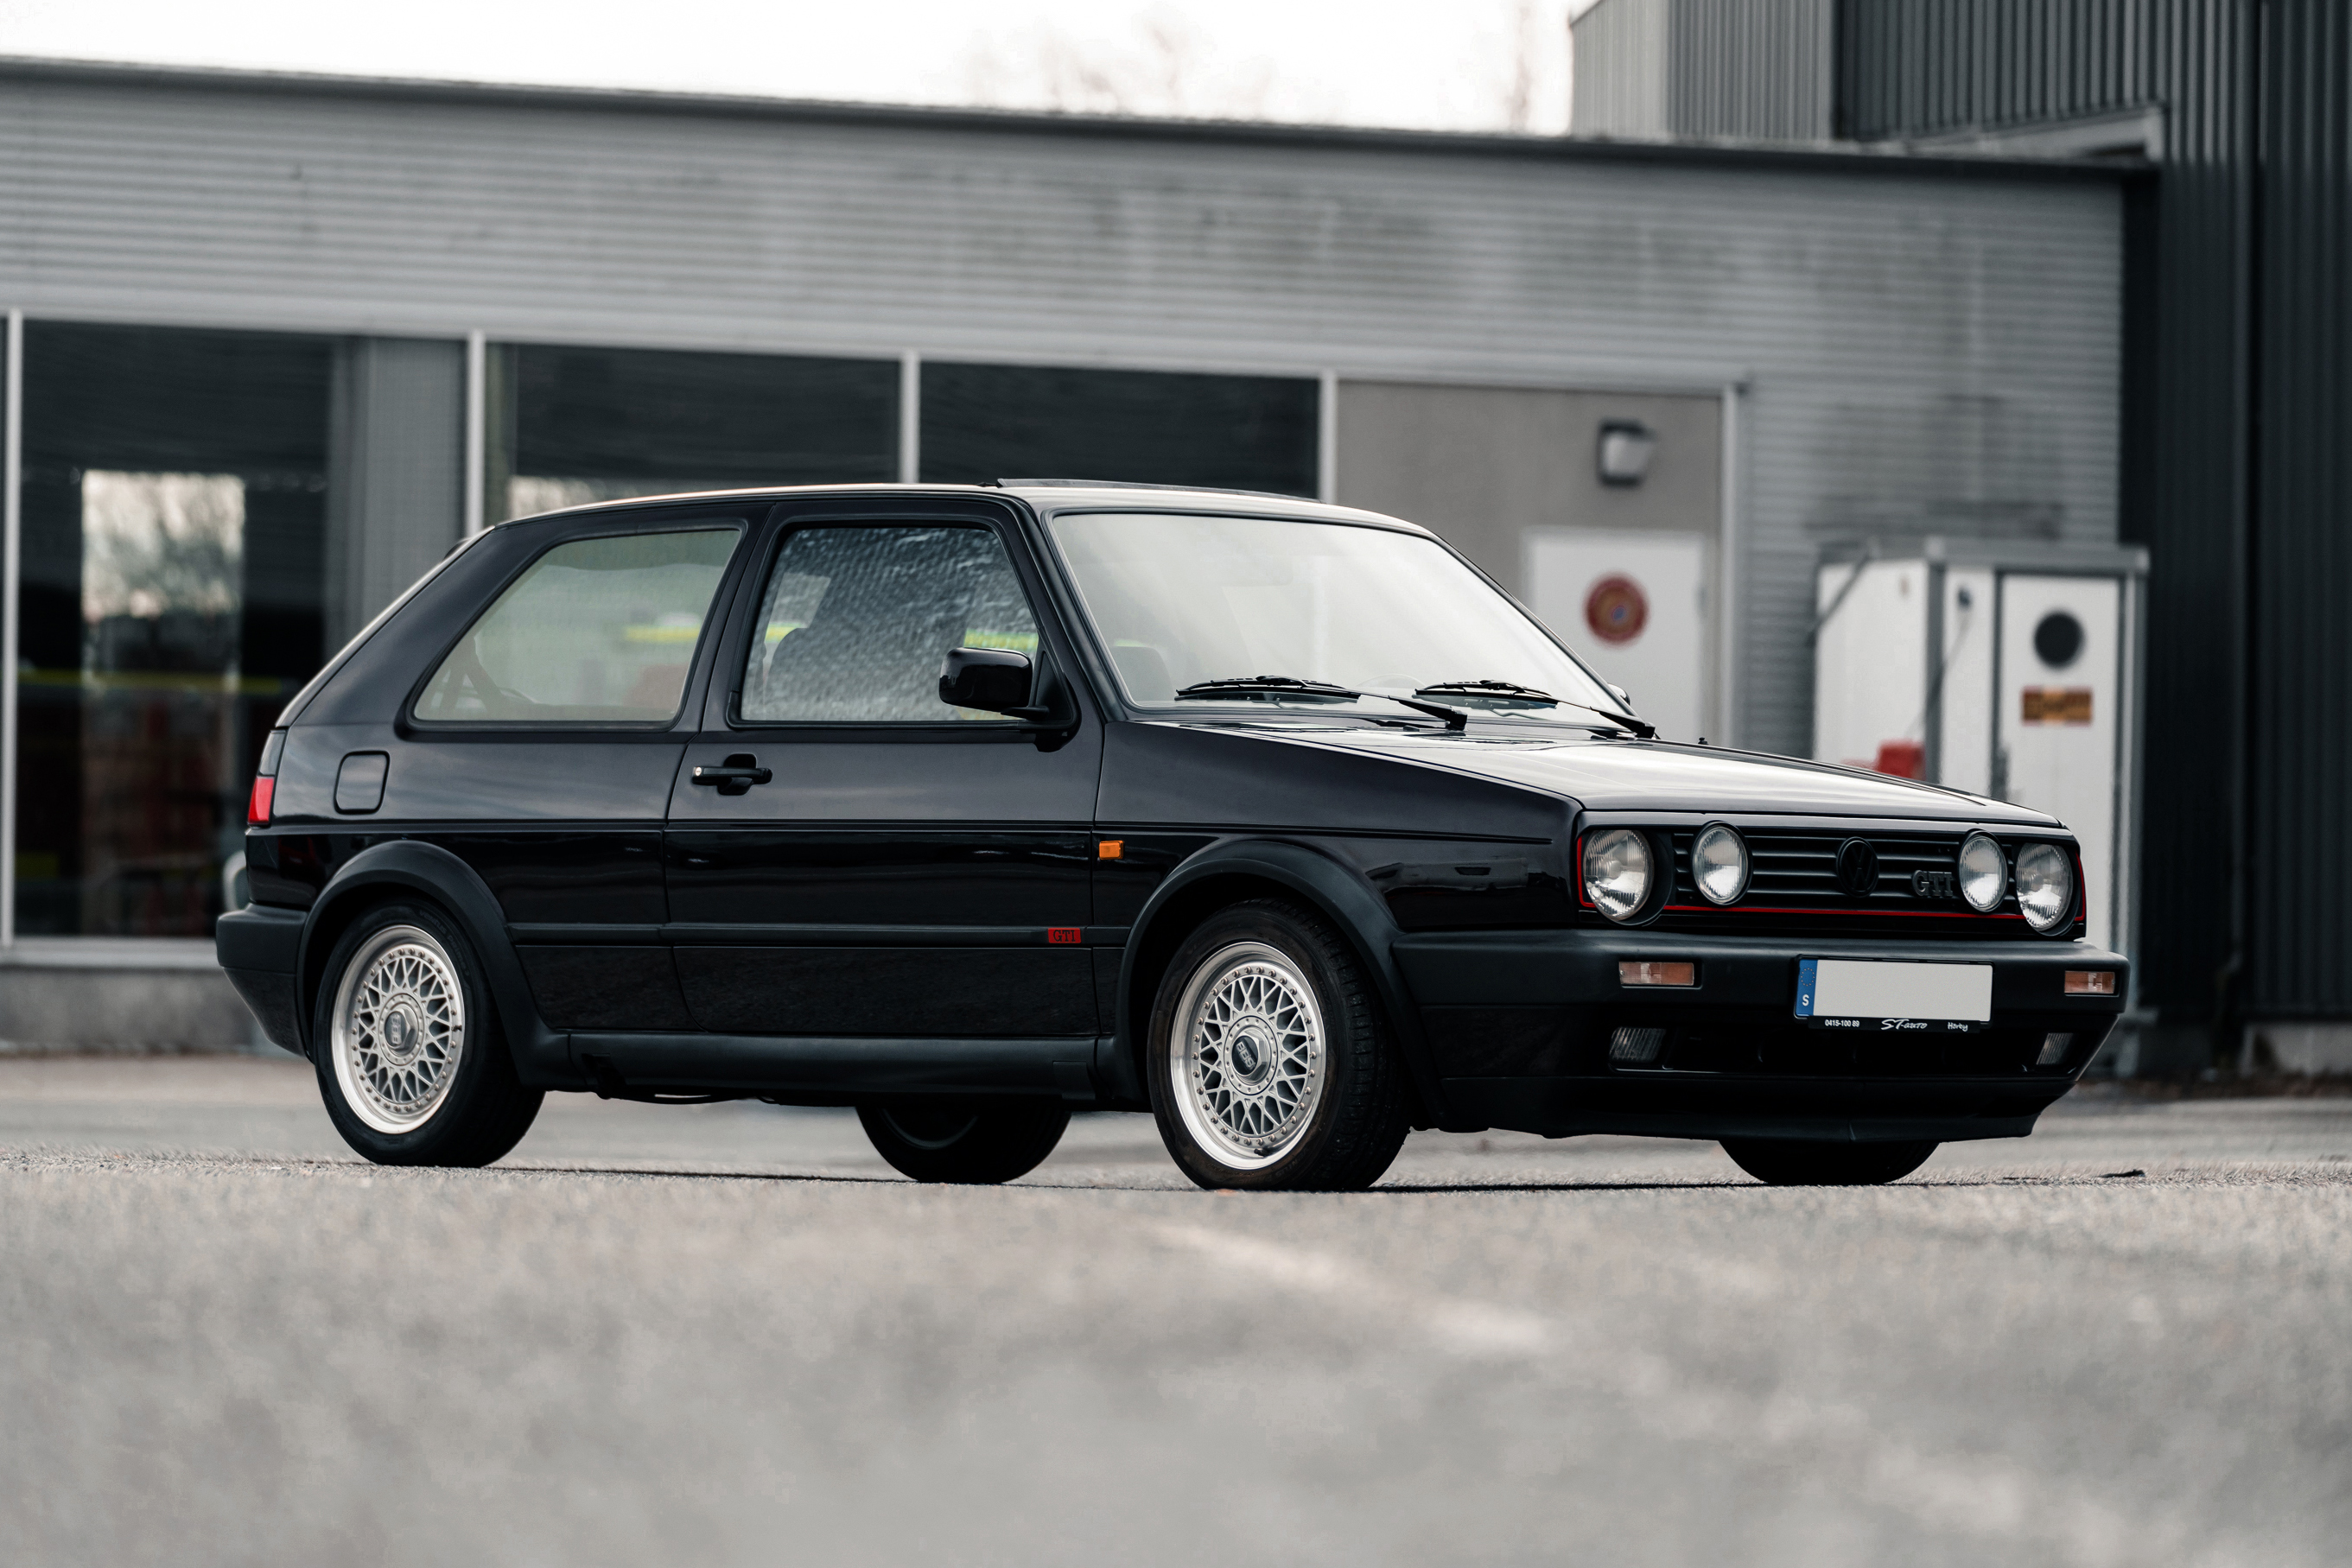 1989 Volkswagen Golf (MK2) GTI 'Edition One' 8V for sale in Hörby